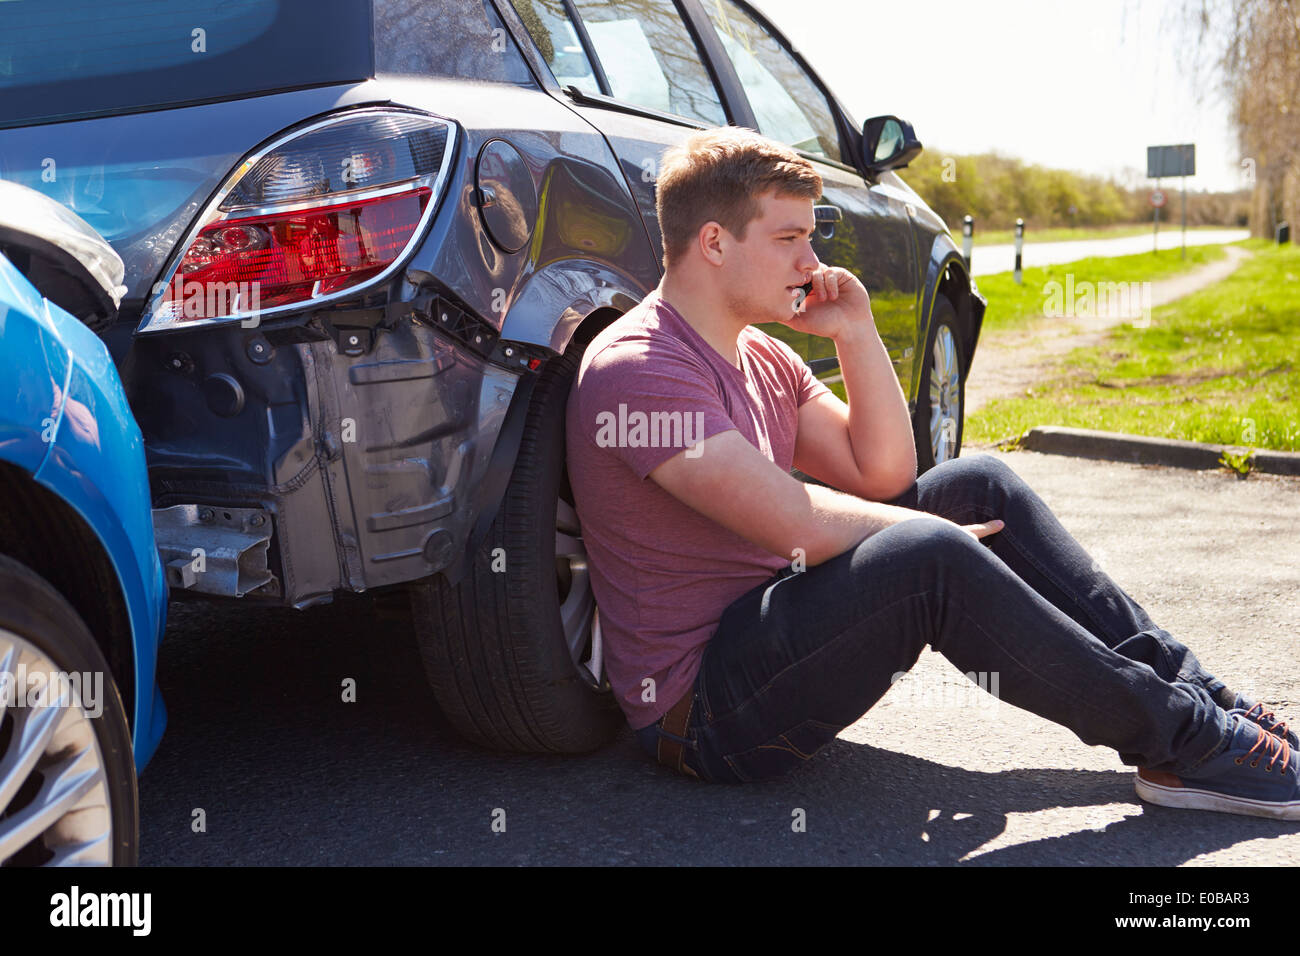 Warning Triangle By Two Cars Involved In Accident Stock Photo